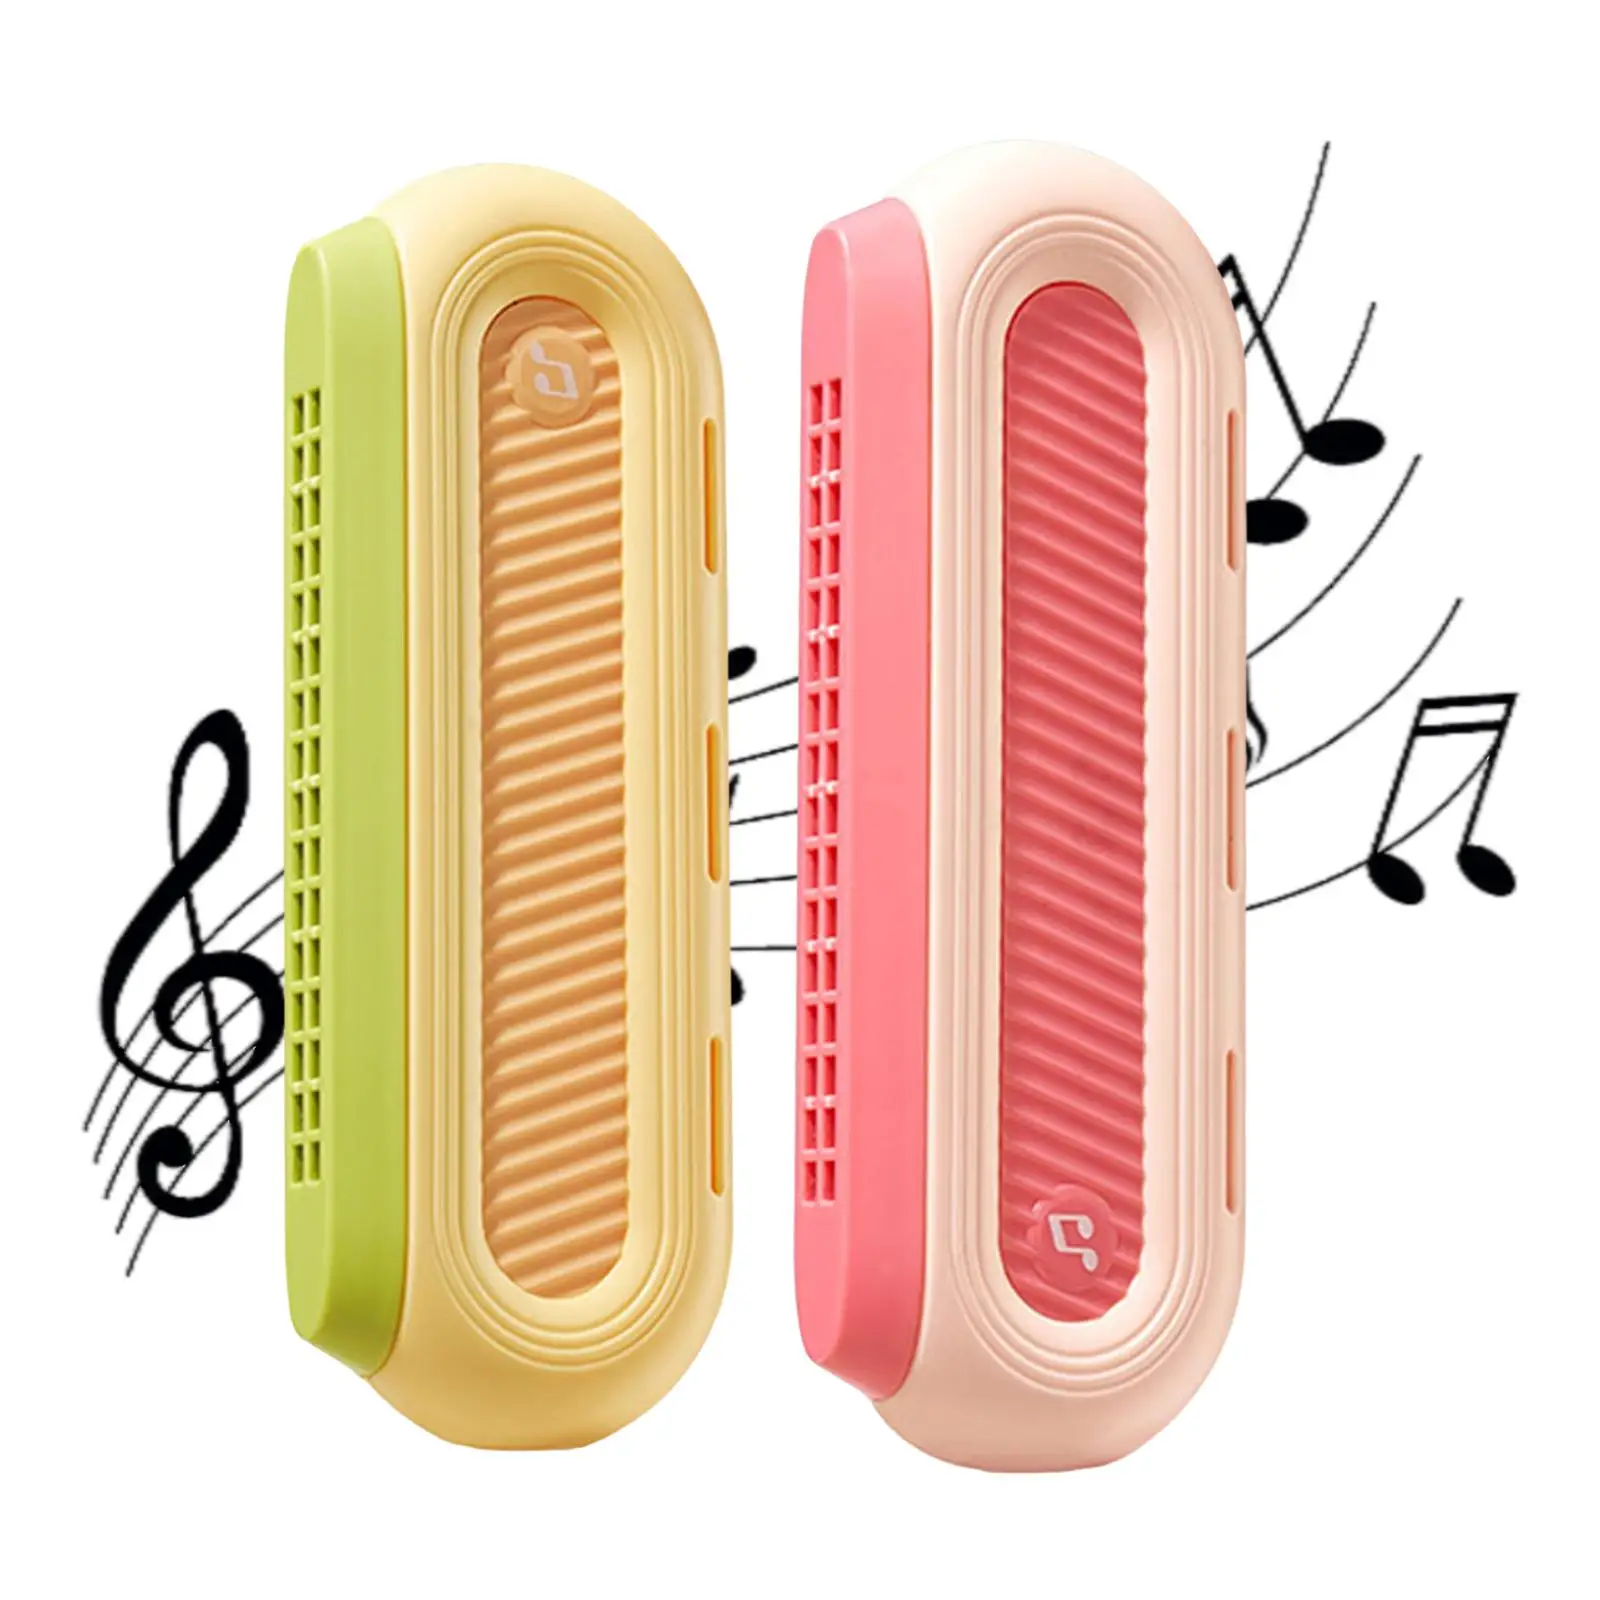 Musical Instrument Play Toy Educational Portable for Party Children Beginner